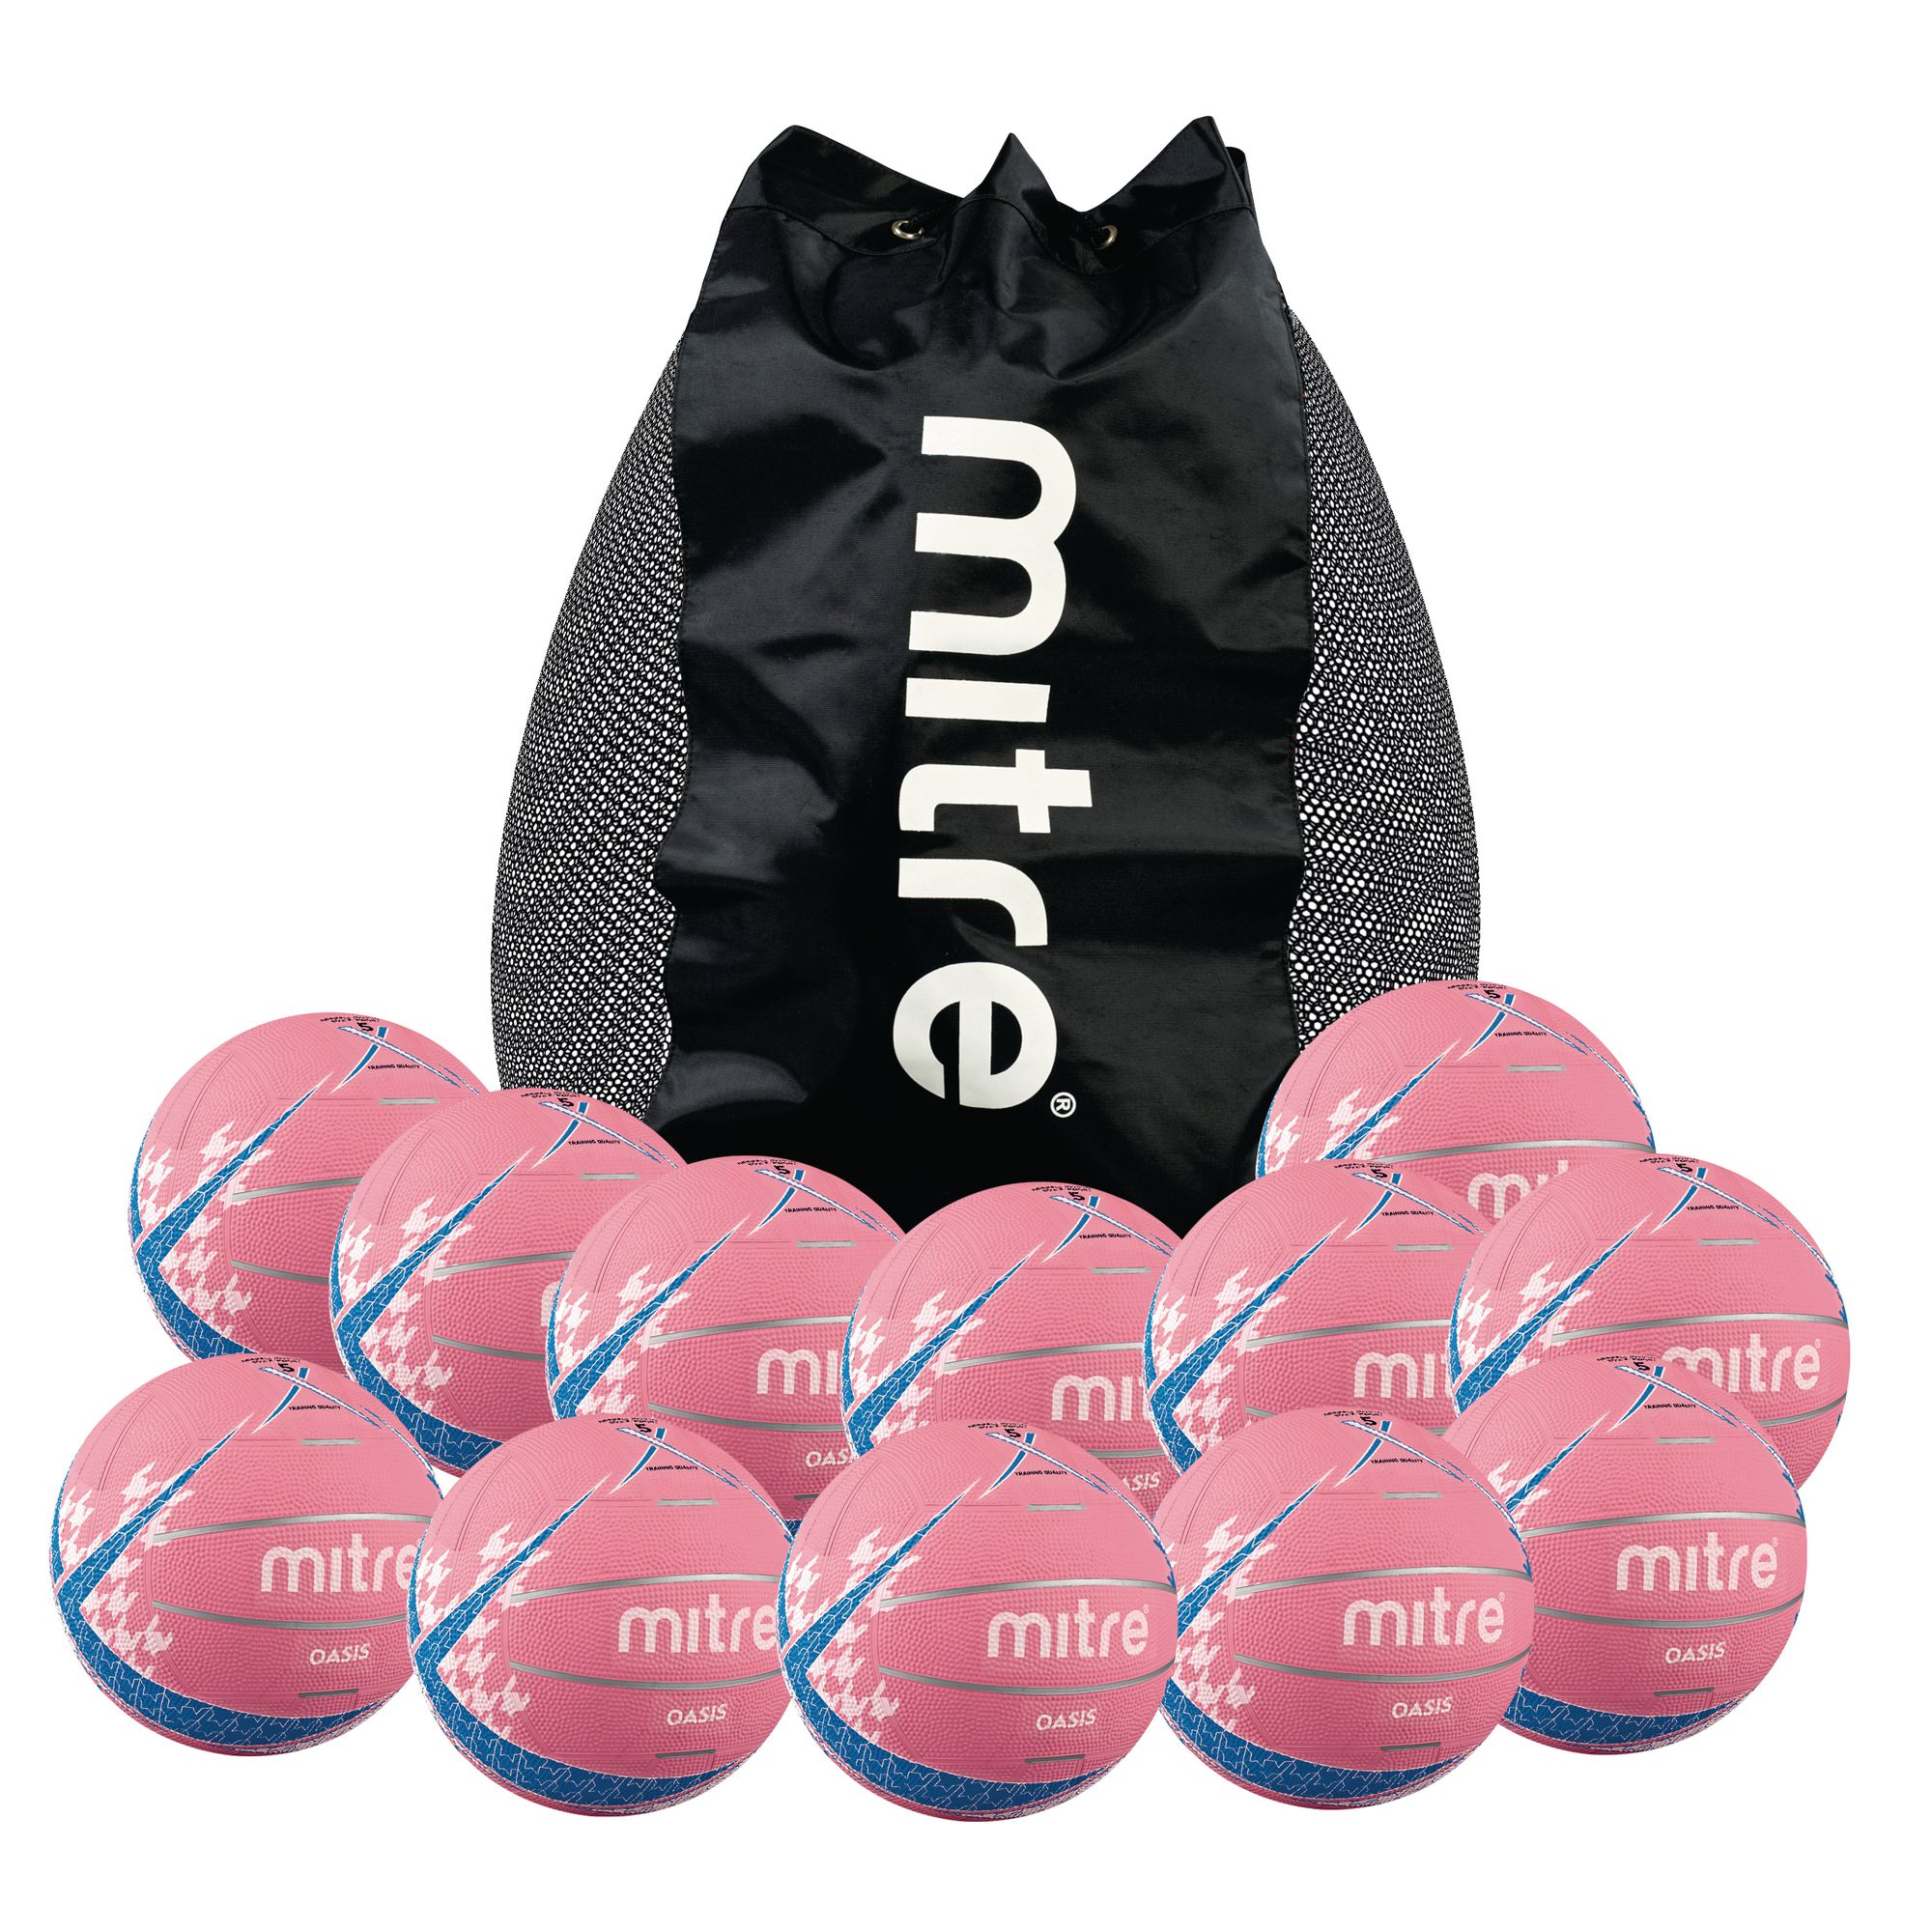 Mitre Oasis Size 5 Pink Pk 12 With Bag